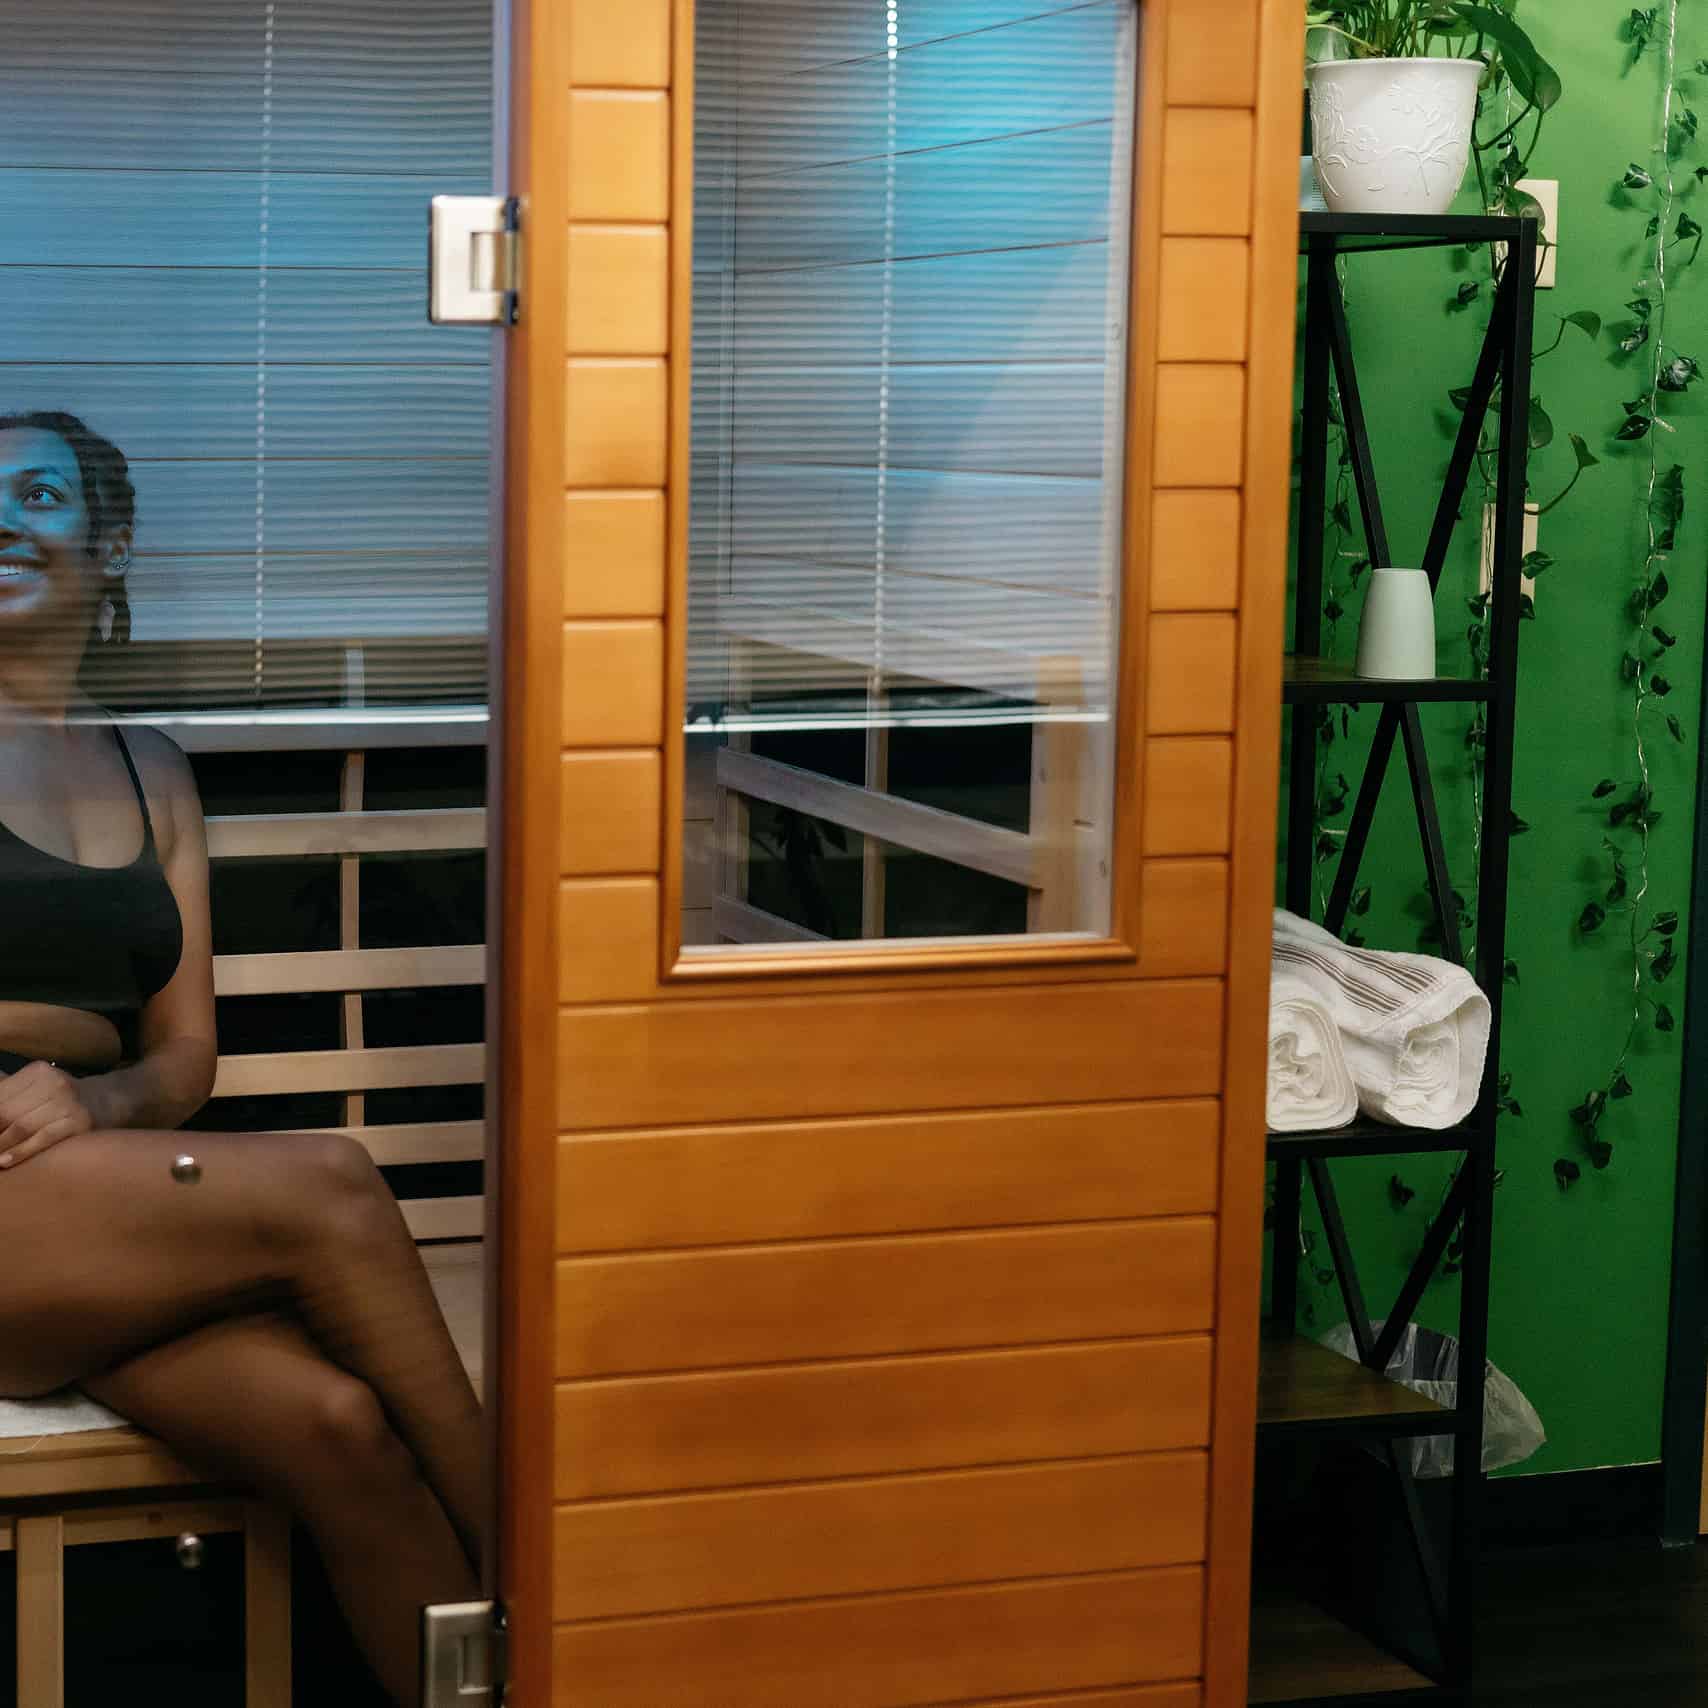 Woman smiling in private infrared sauna